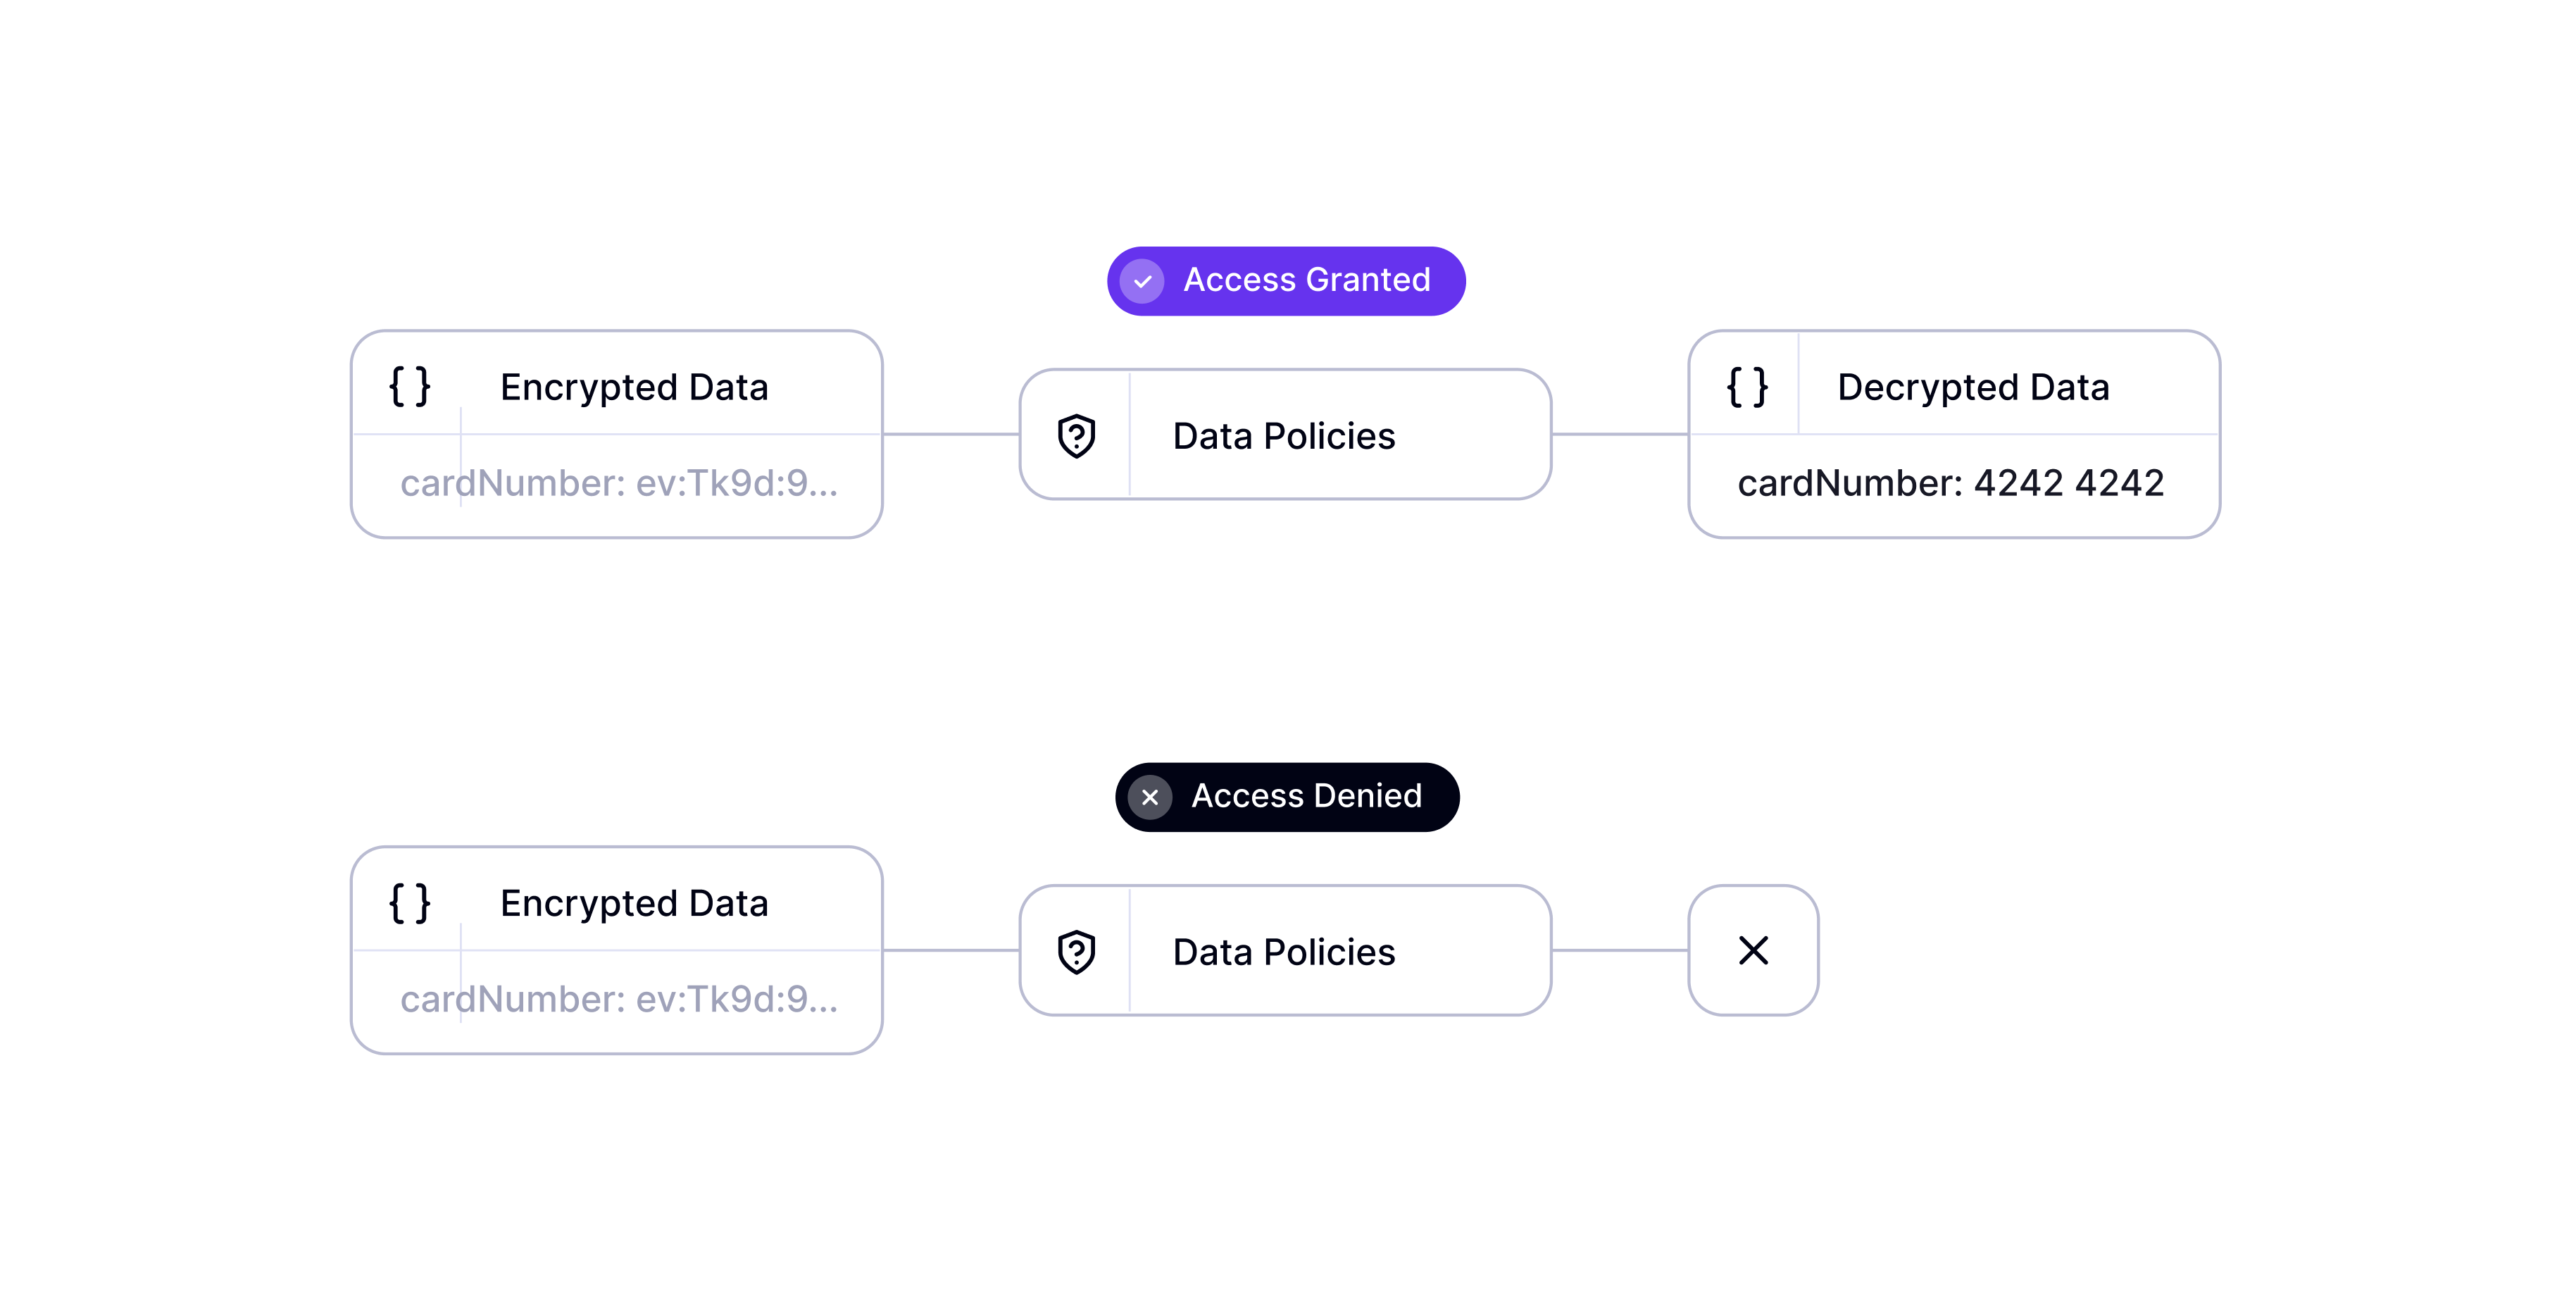 A diagram that shows how Data Policies work. The diagram shows what happens when a policy grants and denies access. The former decrypts data, the latter does not